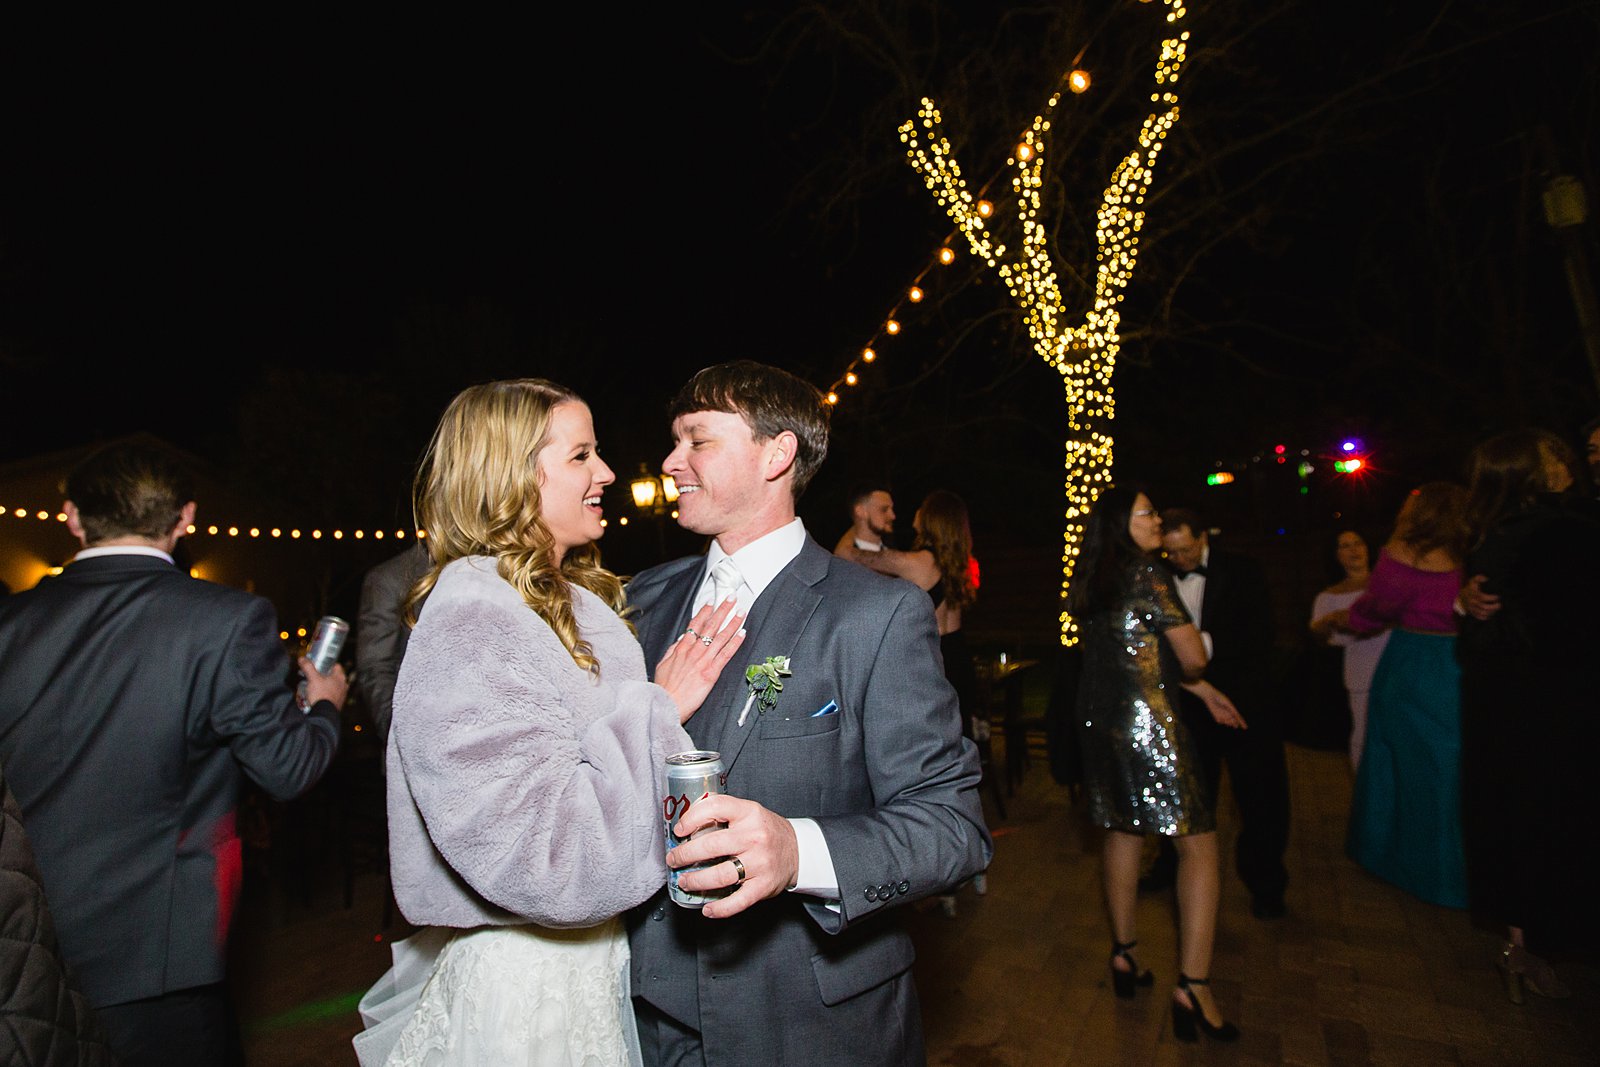 Bride and groom dancing with guests at Venue At The Grove wedding reception by Phoenix wedding photographer PMA Photography